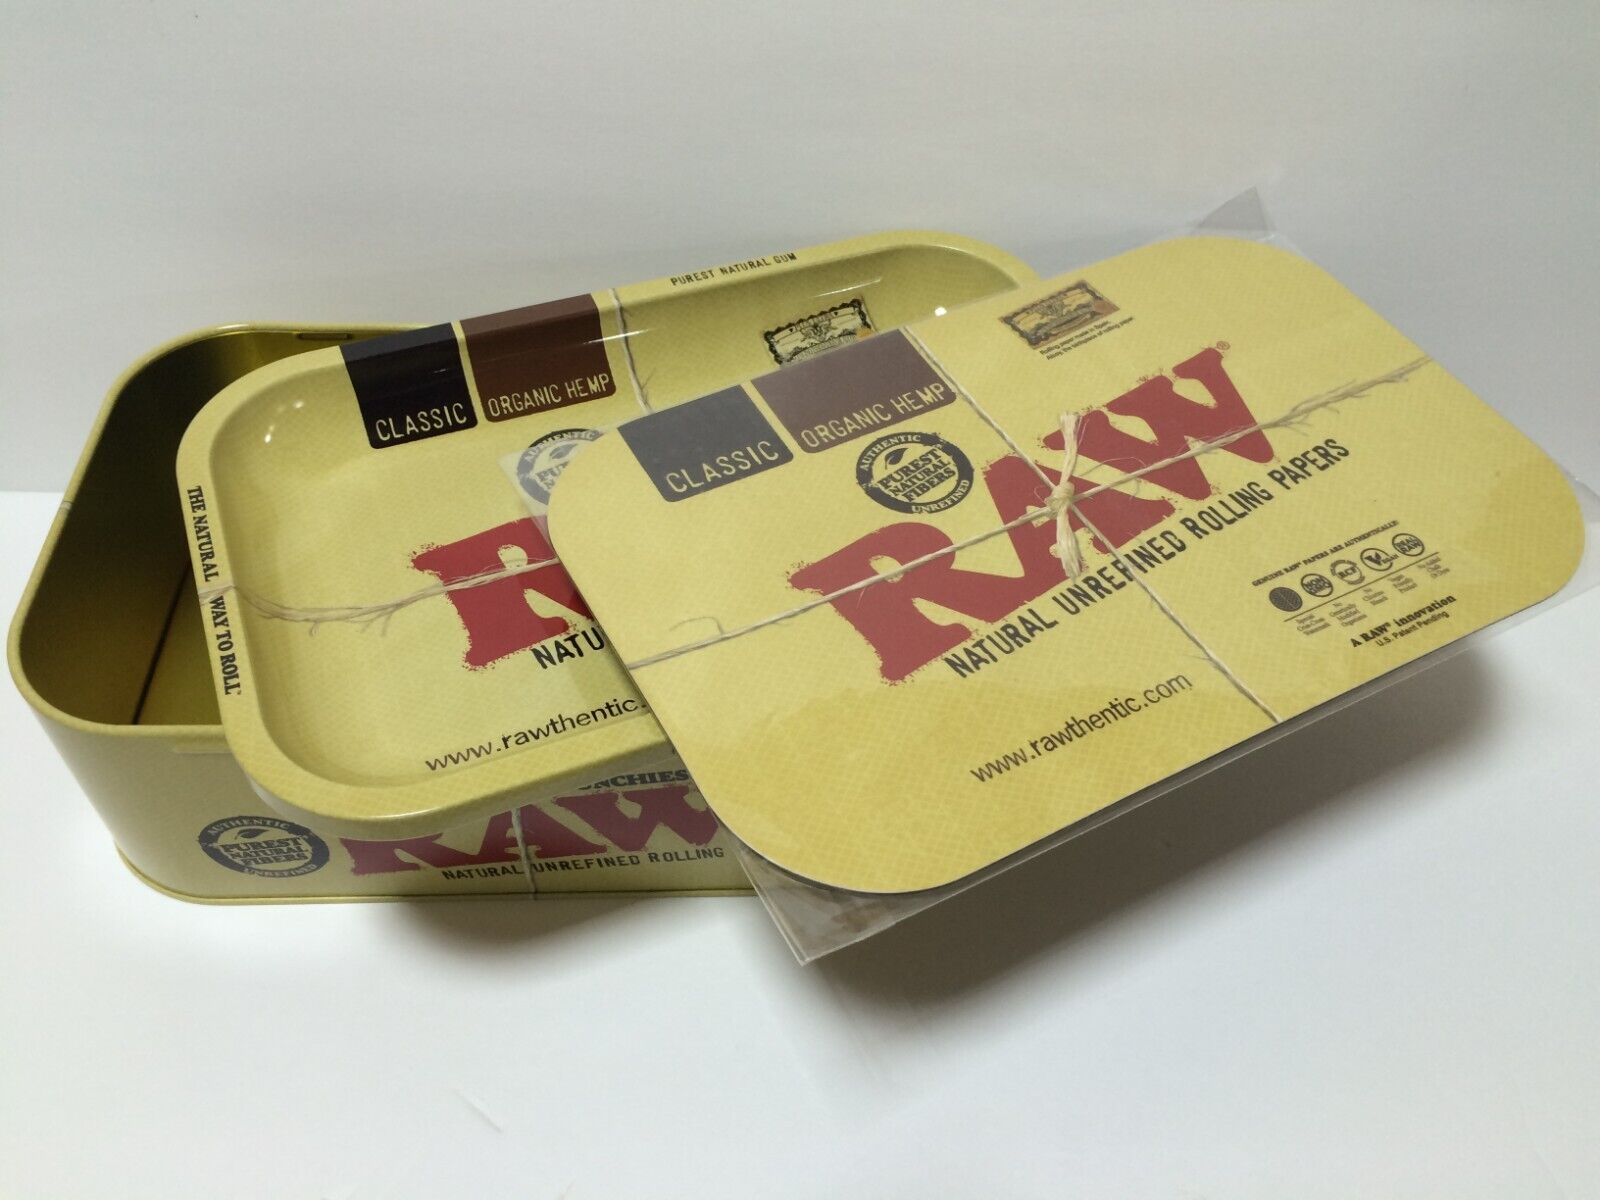 RAW Rolling Papers \